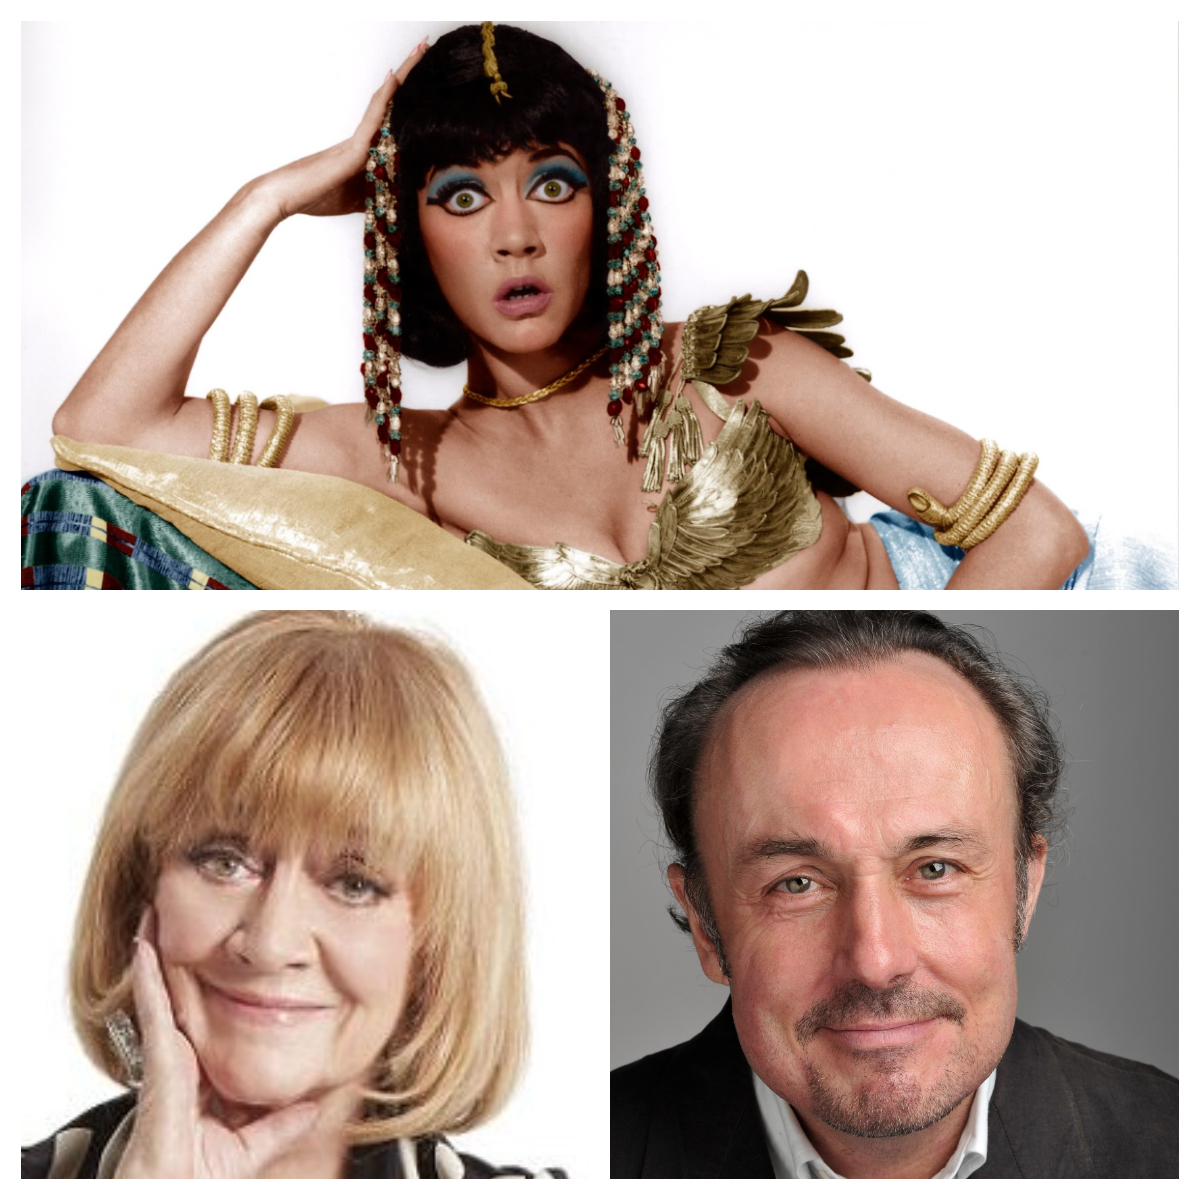 Amanda Barrie will be interviewed by Jonathan Kydd (son of the actor Sam Kydd) in An Evening with Amanda Barrie at The Old Court in Windsor on Sunday 19th May at 7.30pm: tickets.oldcourt.org/sales/events/a…